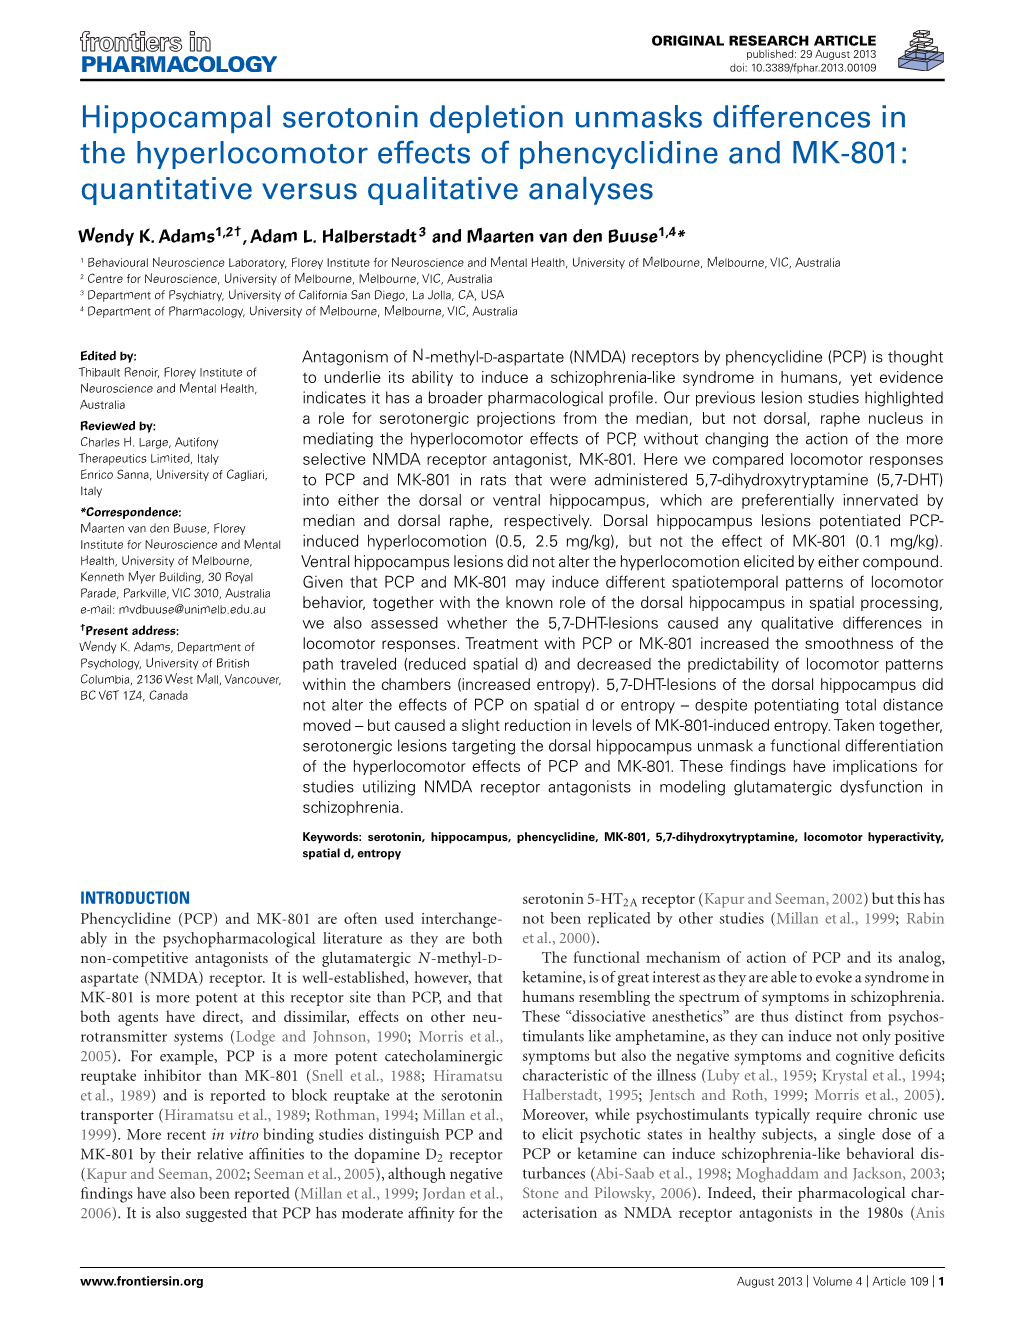 Hippocampal Serotonin Depletion Unmasks Differences in the Hyperlocomotor Effects of Phencyclidine and MK-801: Quantitative Versus Qualitative Analyses